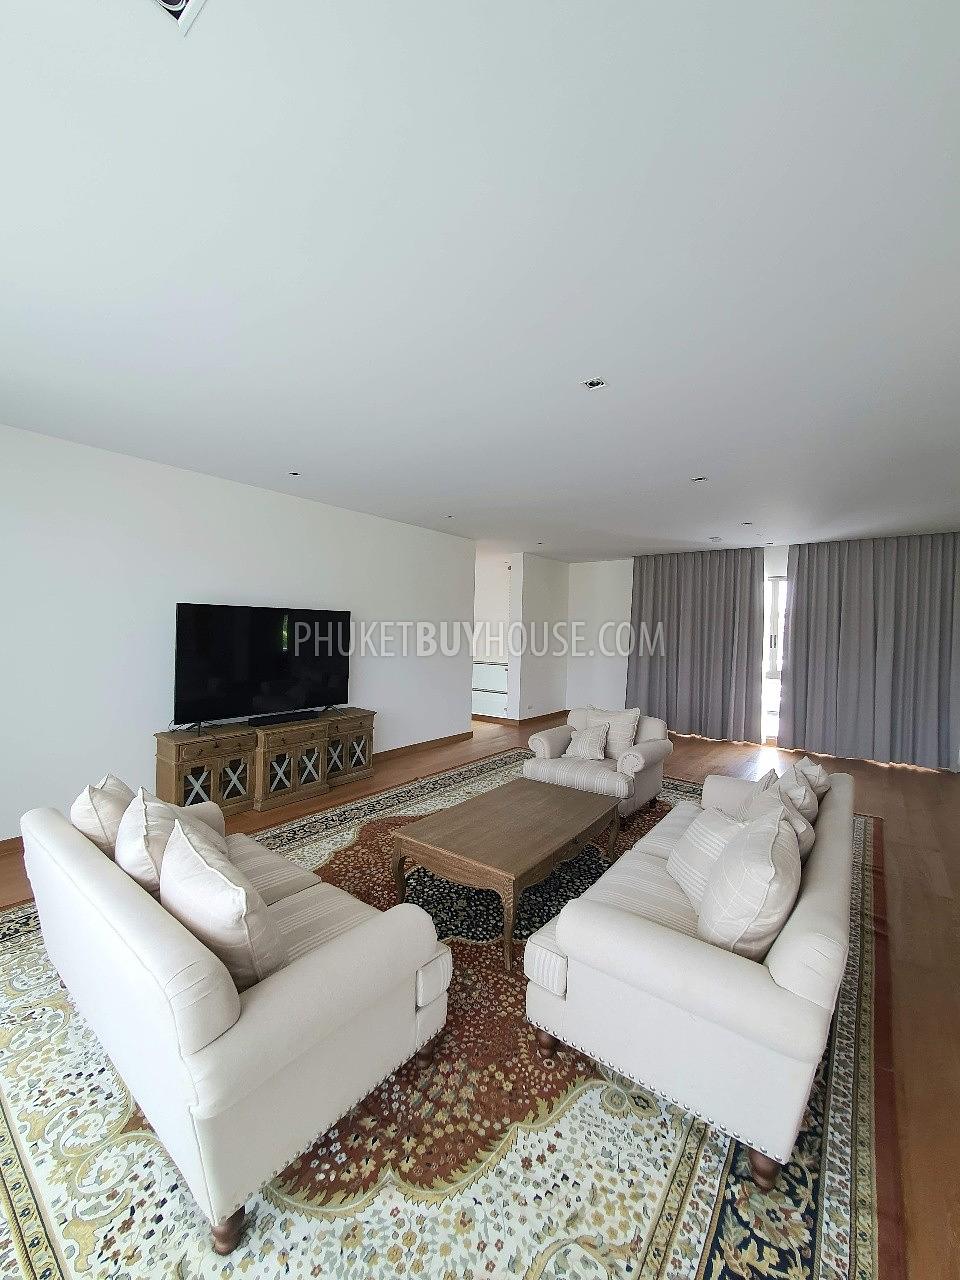 LAG6783: Magnificent New House For Sale in Laguna. Photo #24